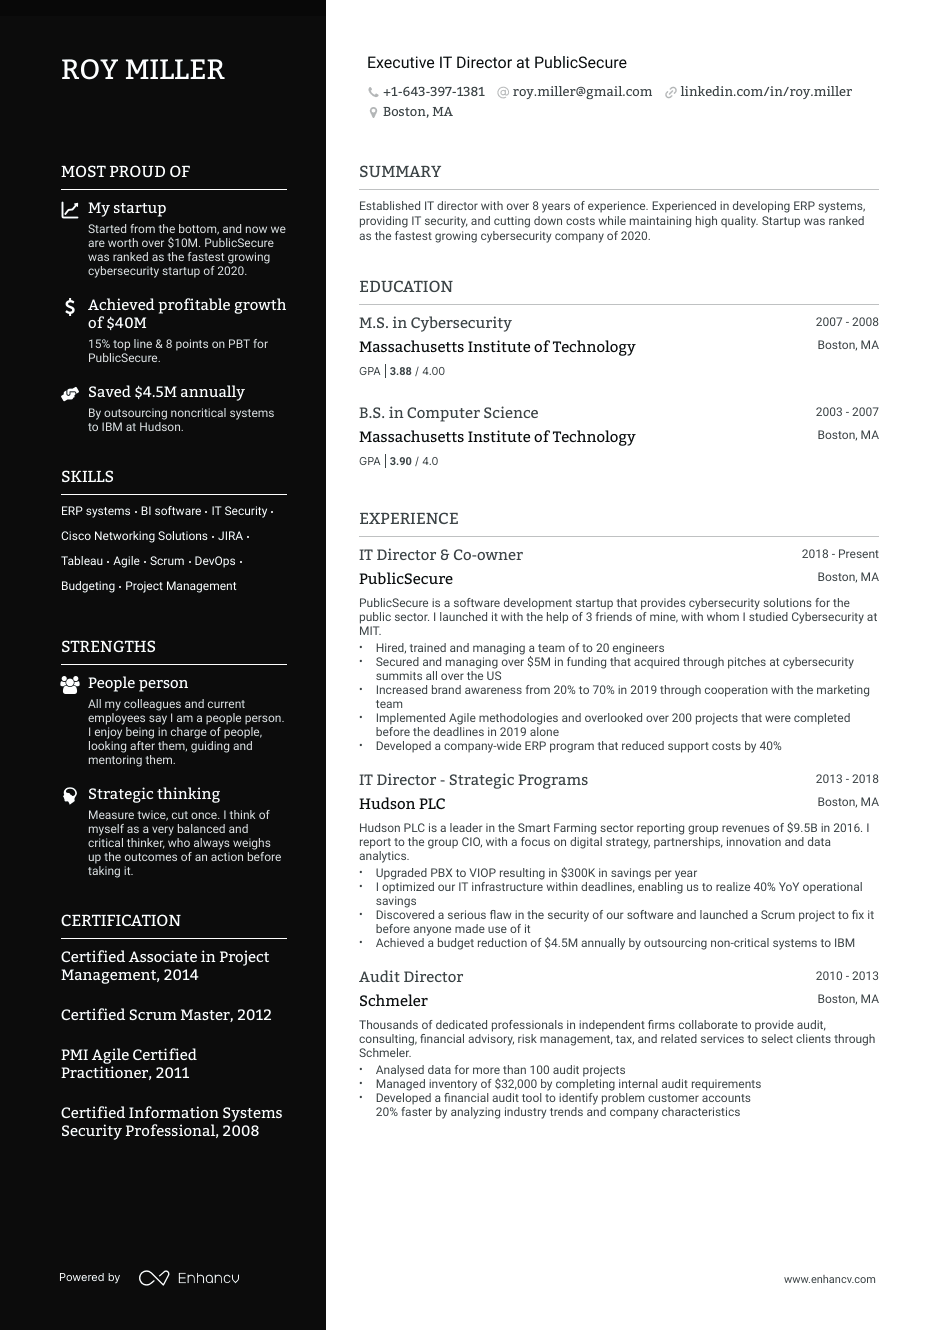 Executive IT director resume example